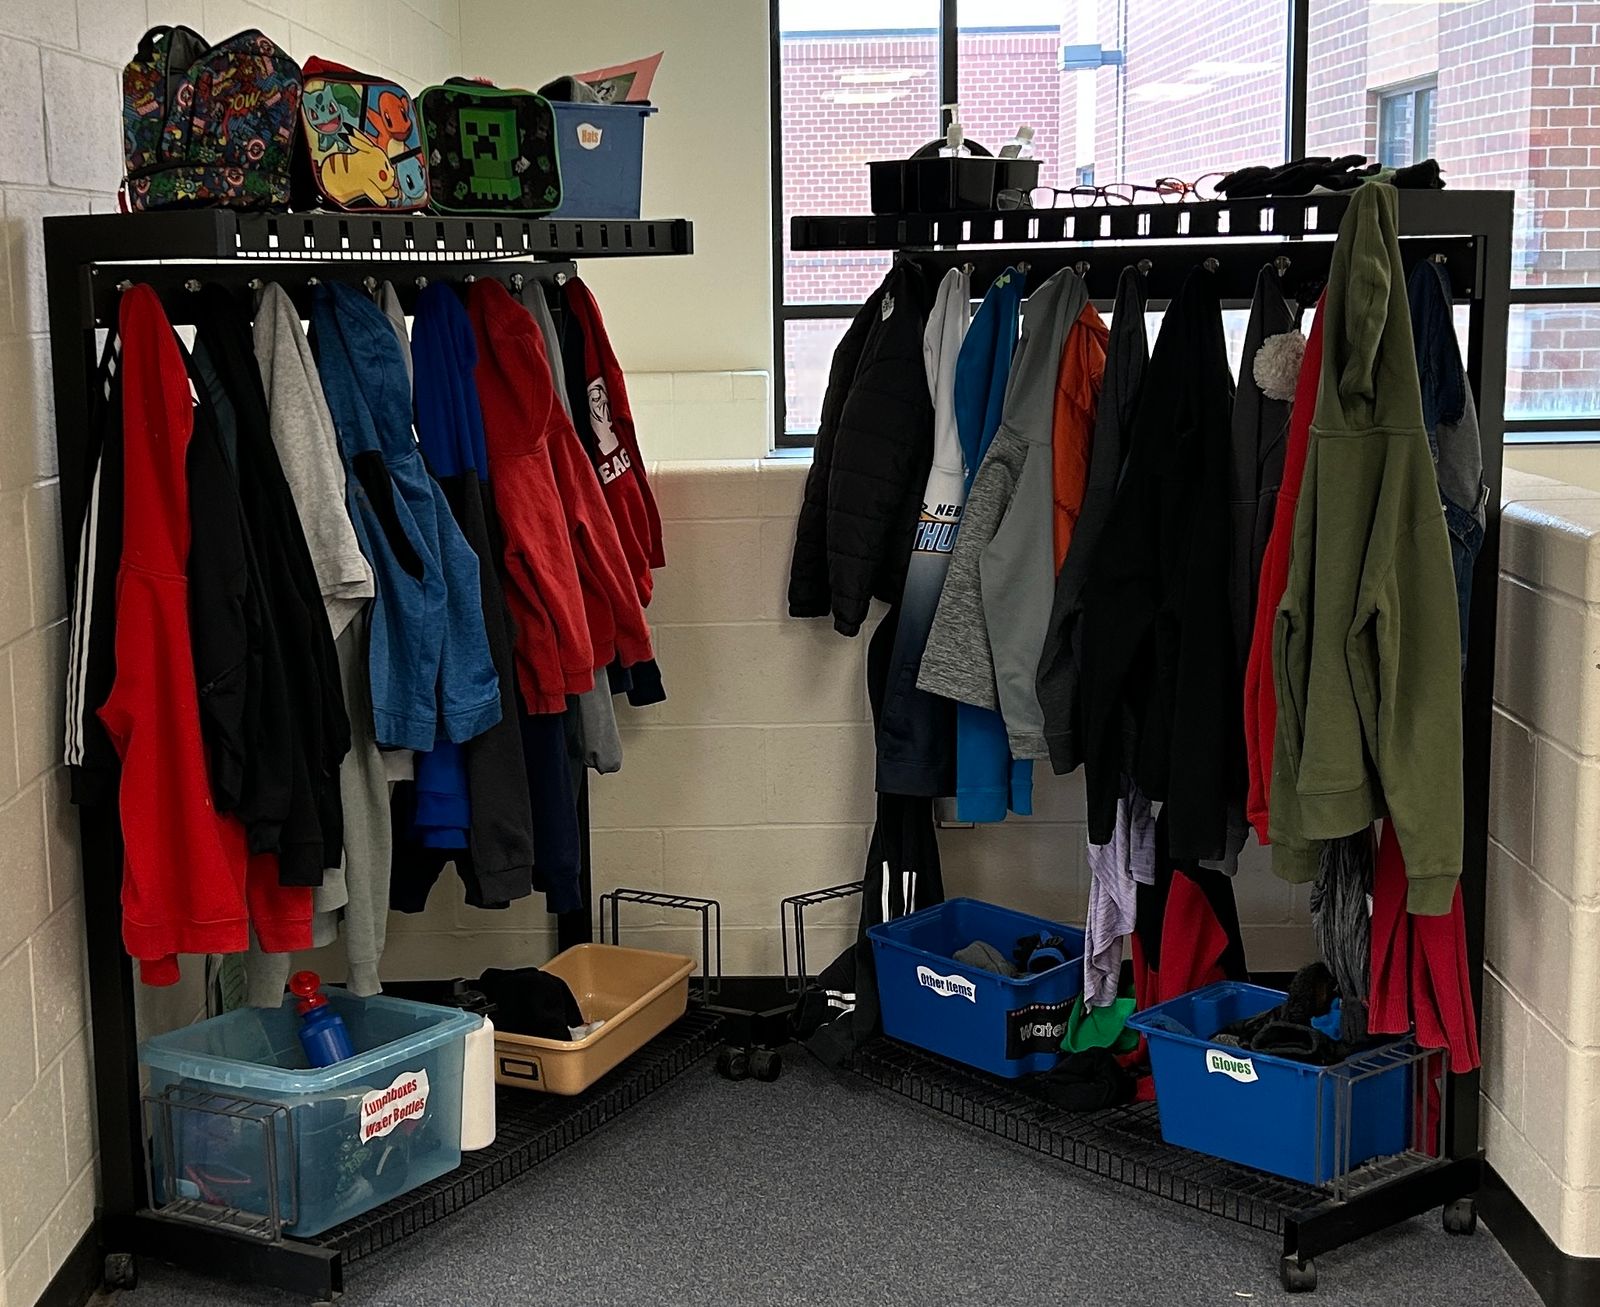 Two racks of clothes stand against walls in a school. On the floor under the racks are bins and on top of the racks are lunch boxes, glasses and other items.